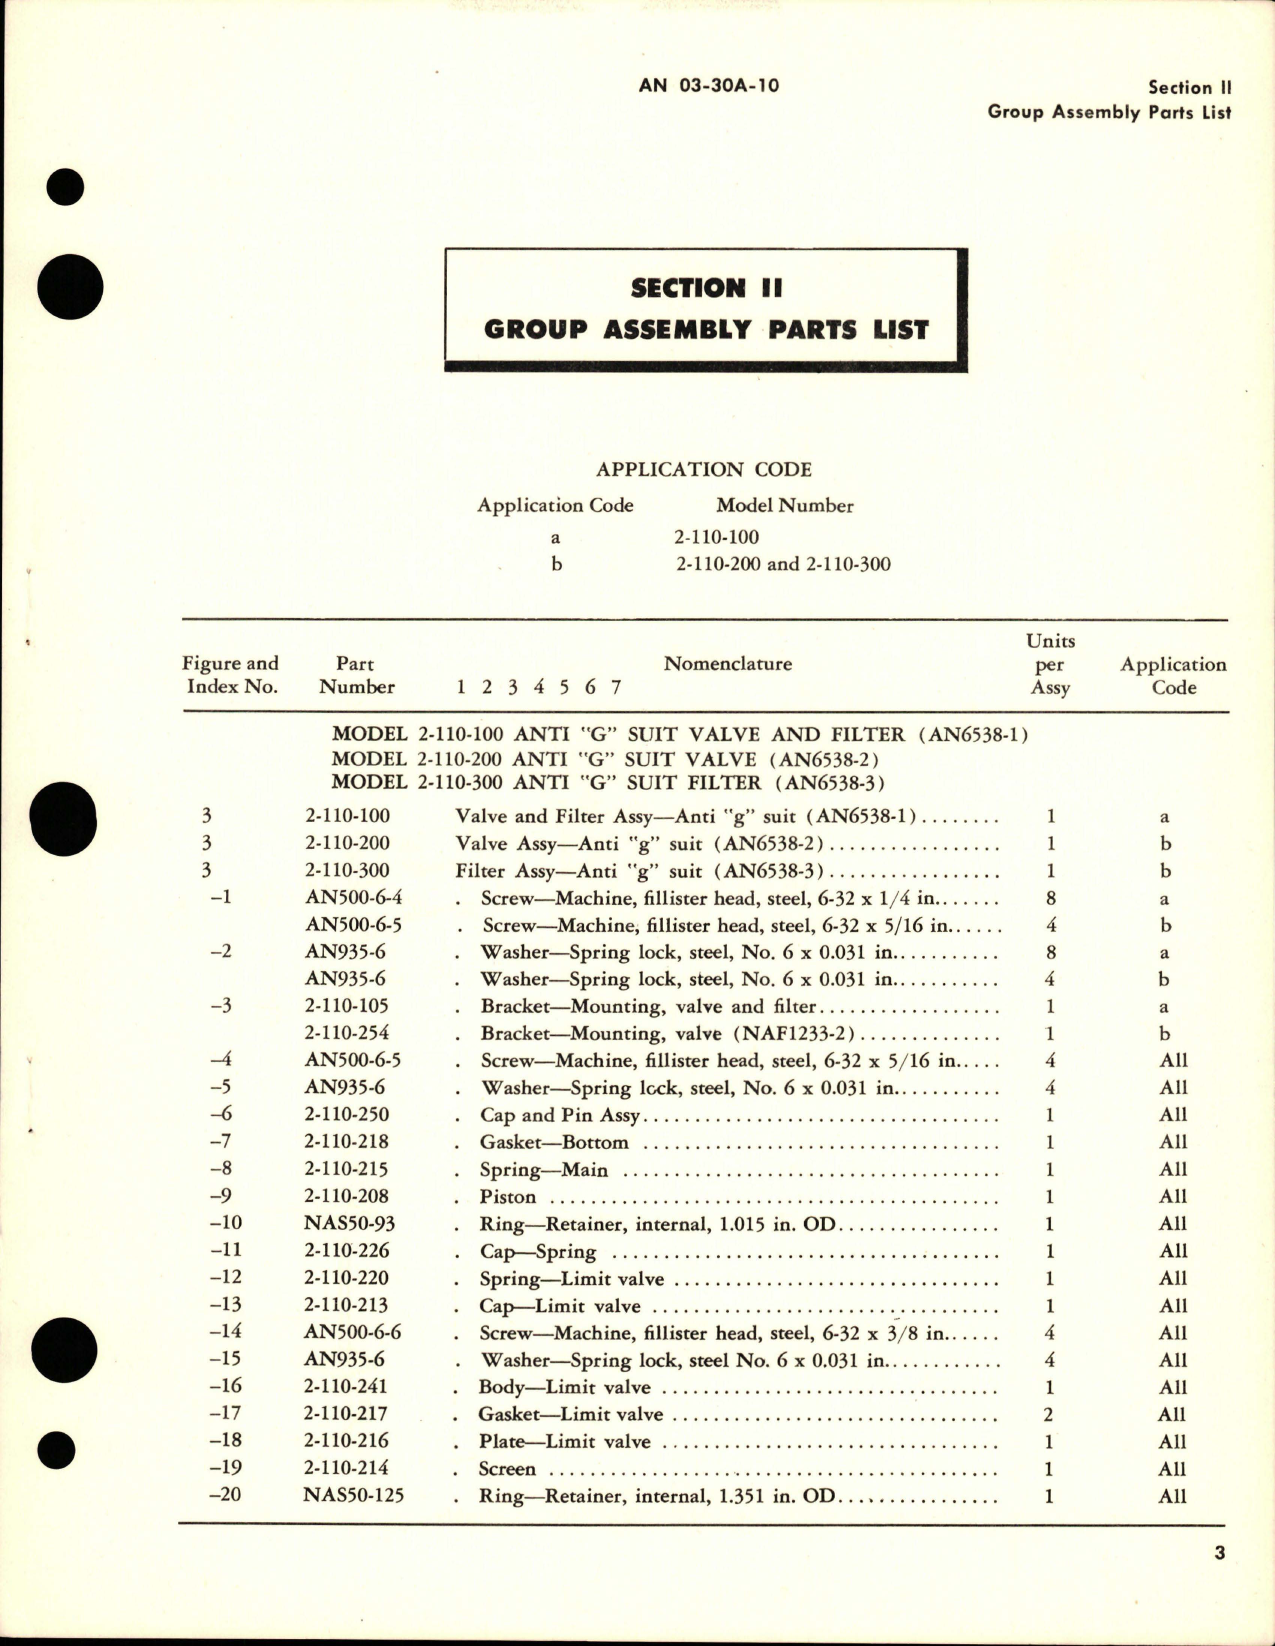 Sample page 5 from AirCorps Library document: Parts Catalog for Anti G Suit Valve and Filter - Models 2-110-100, 2-110-200, and 2-110-300